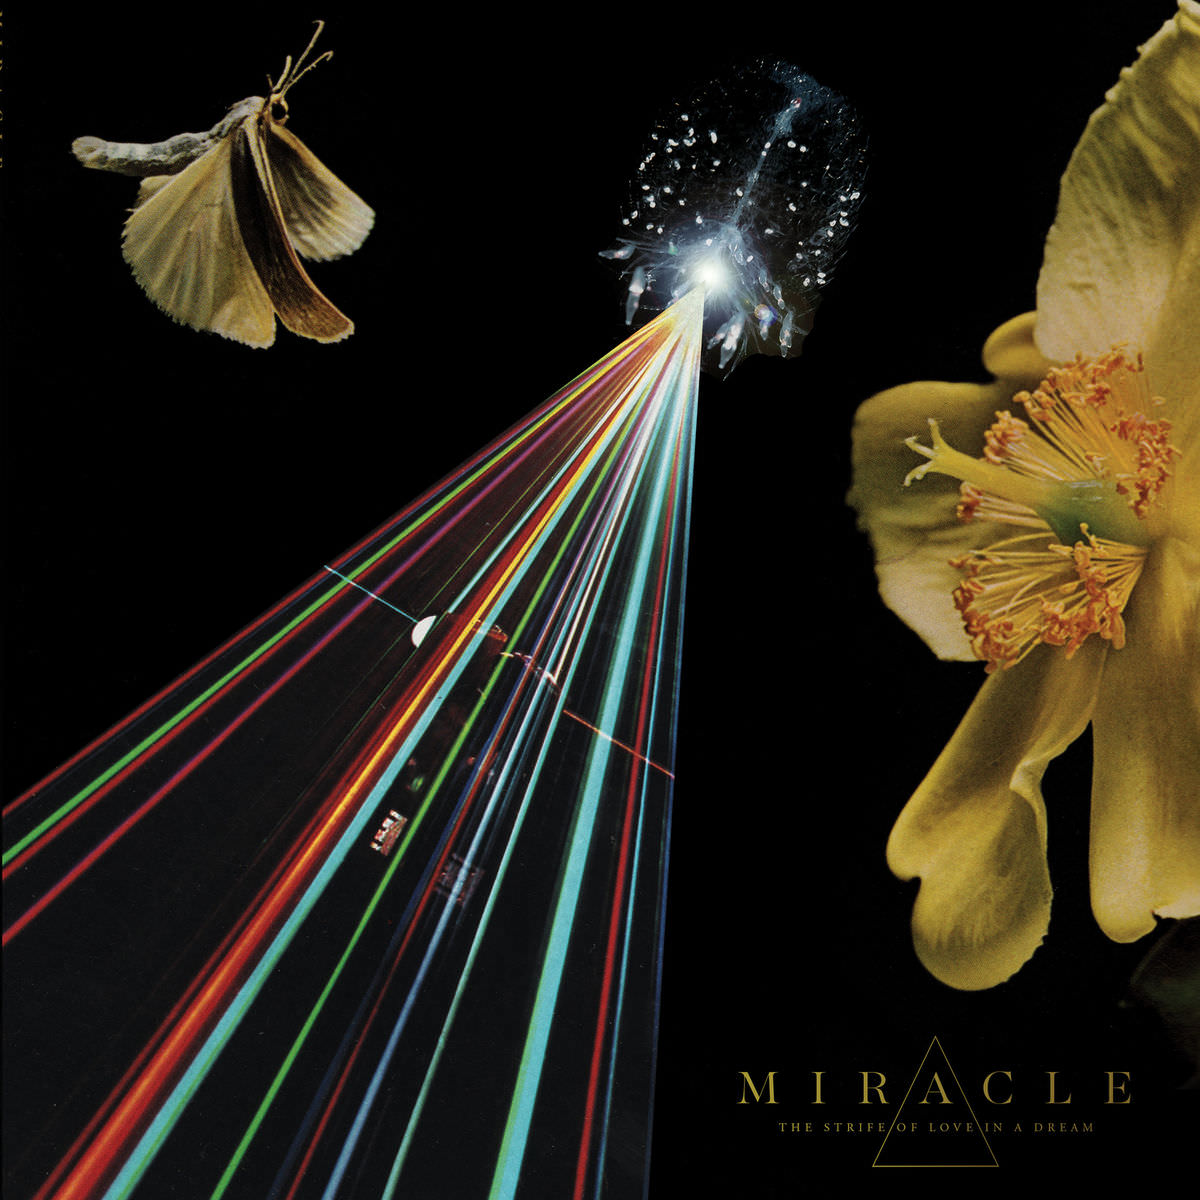 Miracle - The Strife of Love in a Dream (2018) [FLAC 24bit/96kHz]